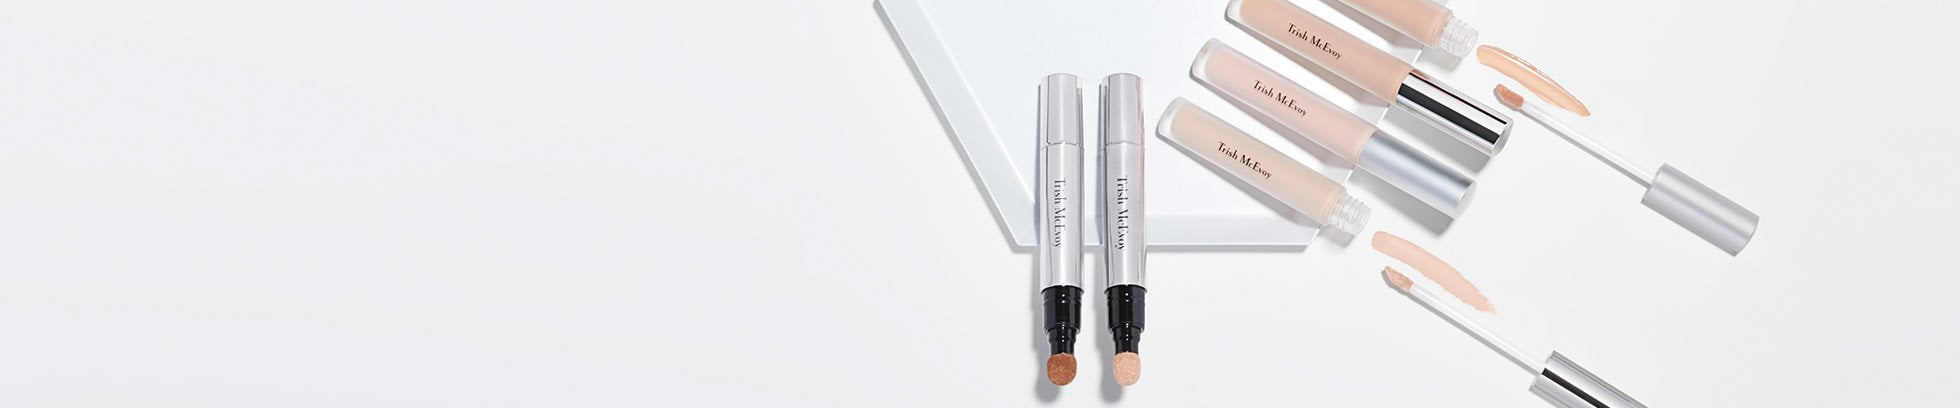 Brighten, correct, and blur dark spots and dark circles with Trish McEvoy's concealers